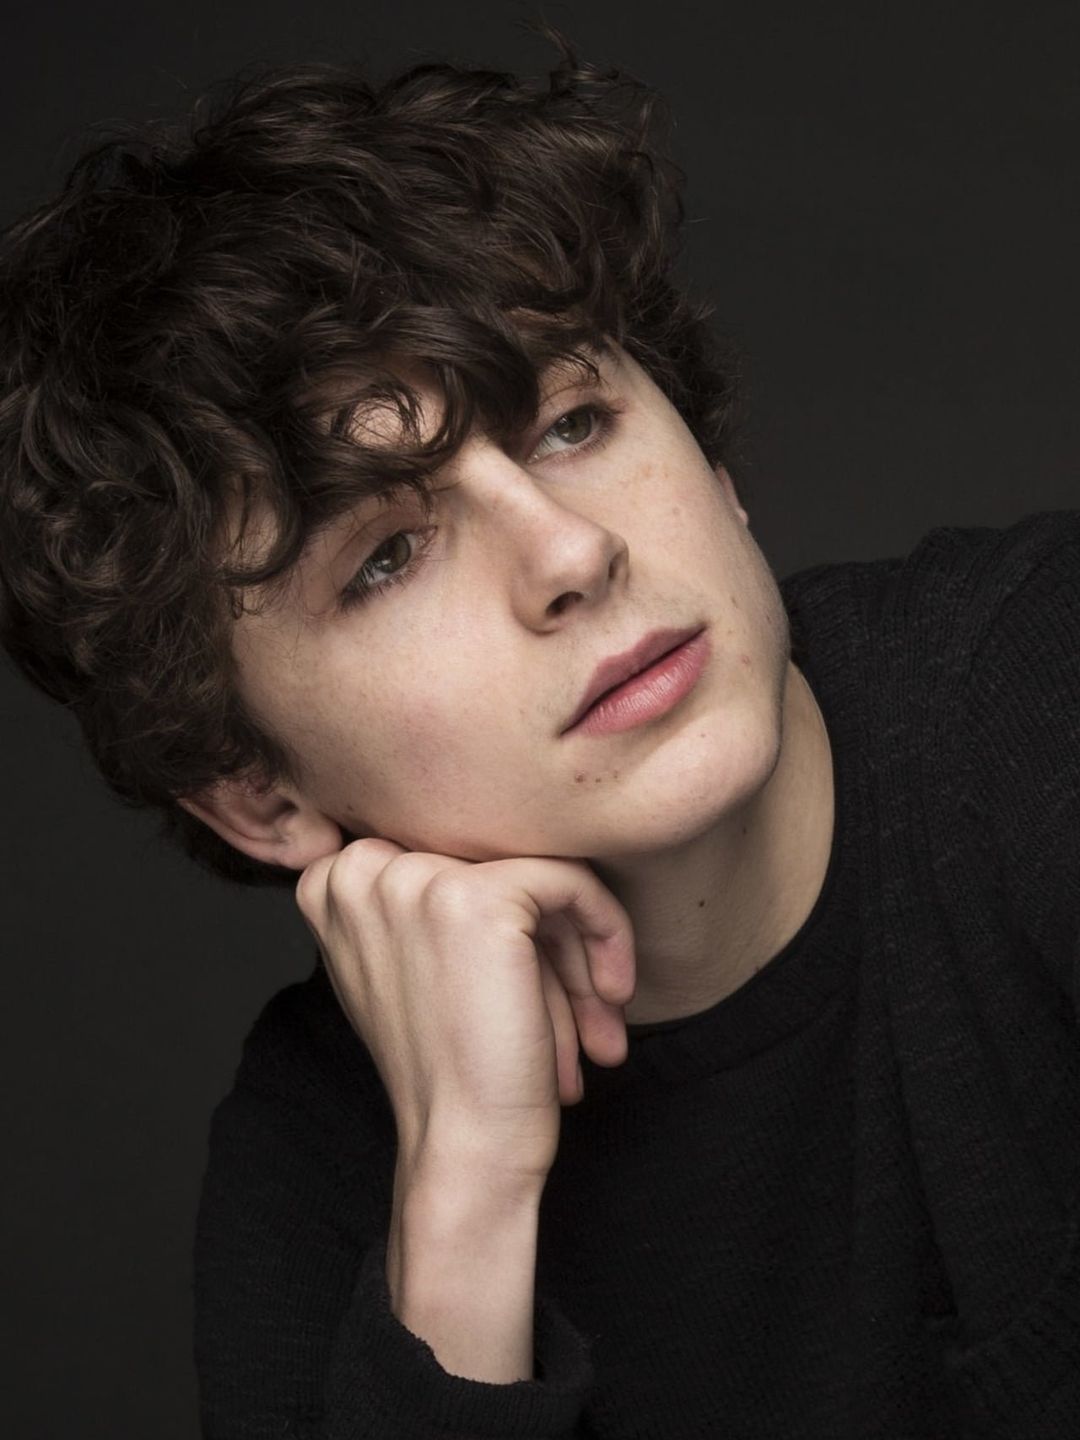 Timothee Chalamet who is his father